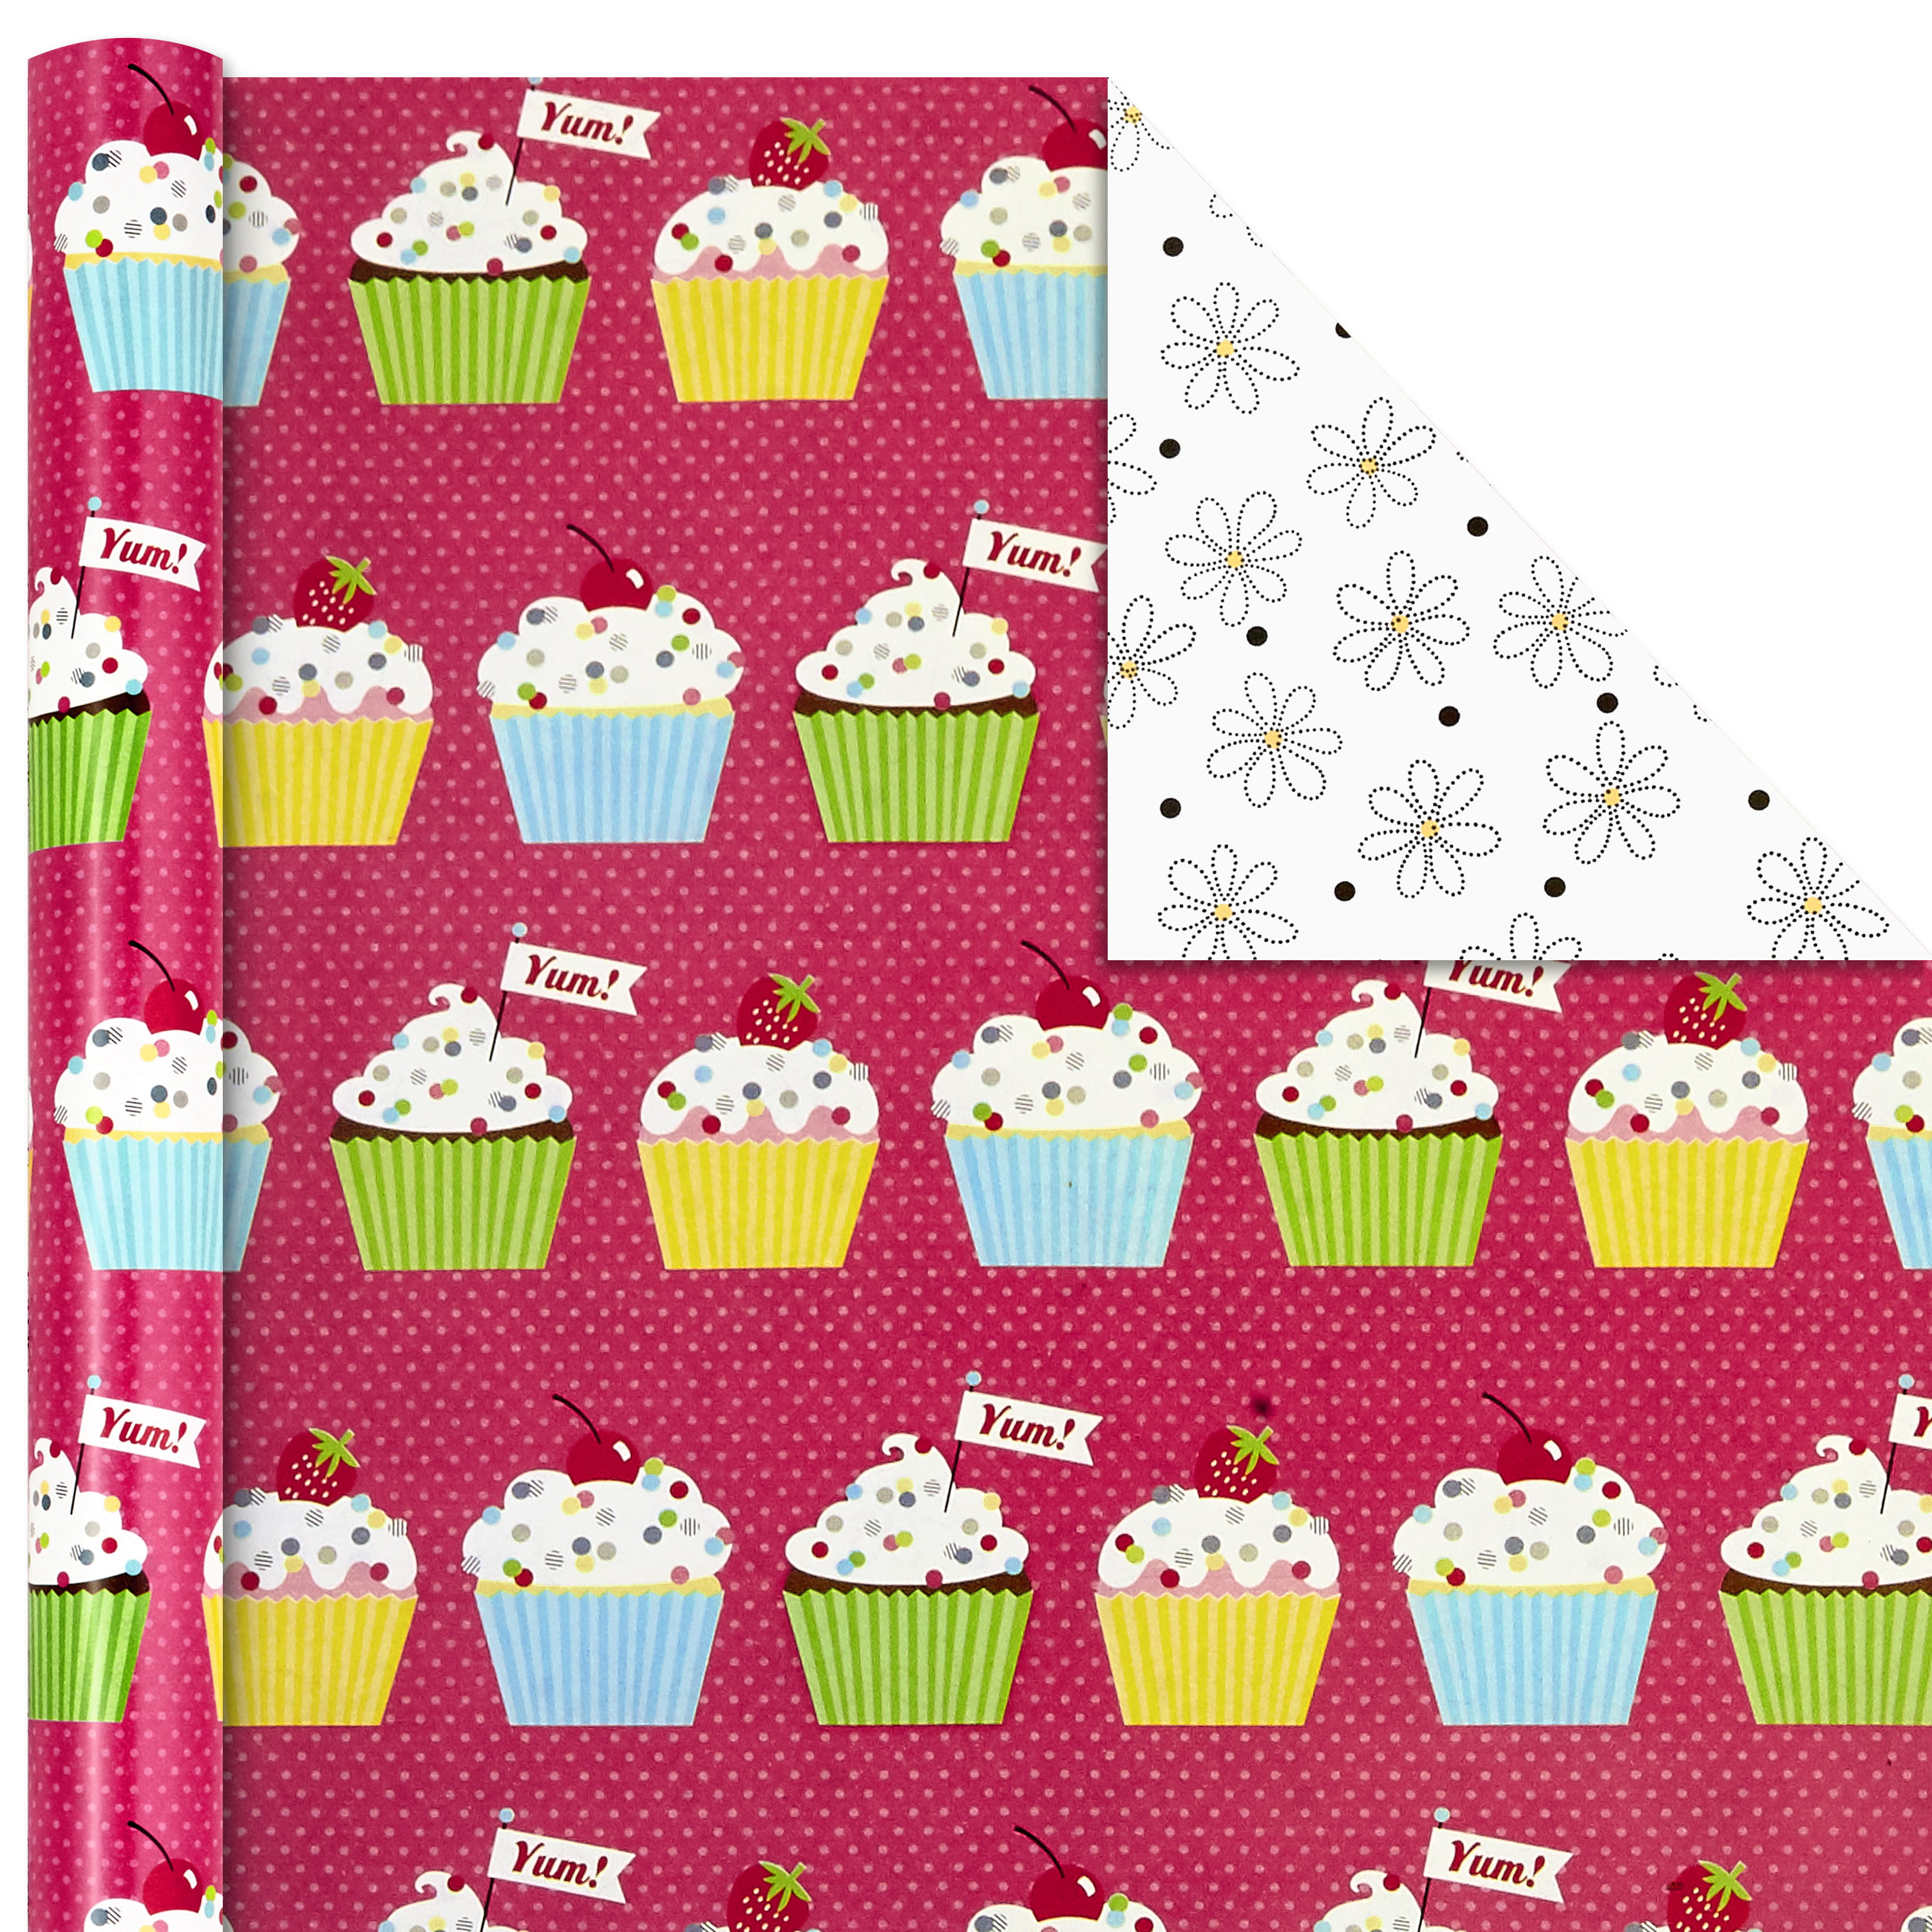 Bright Birthday 3-Pack Reversible Wrapping Paper